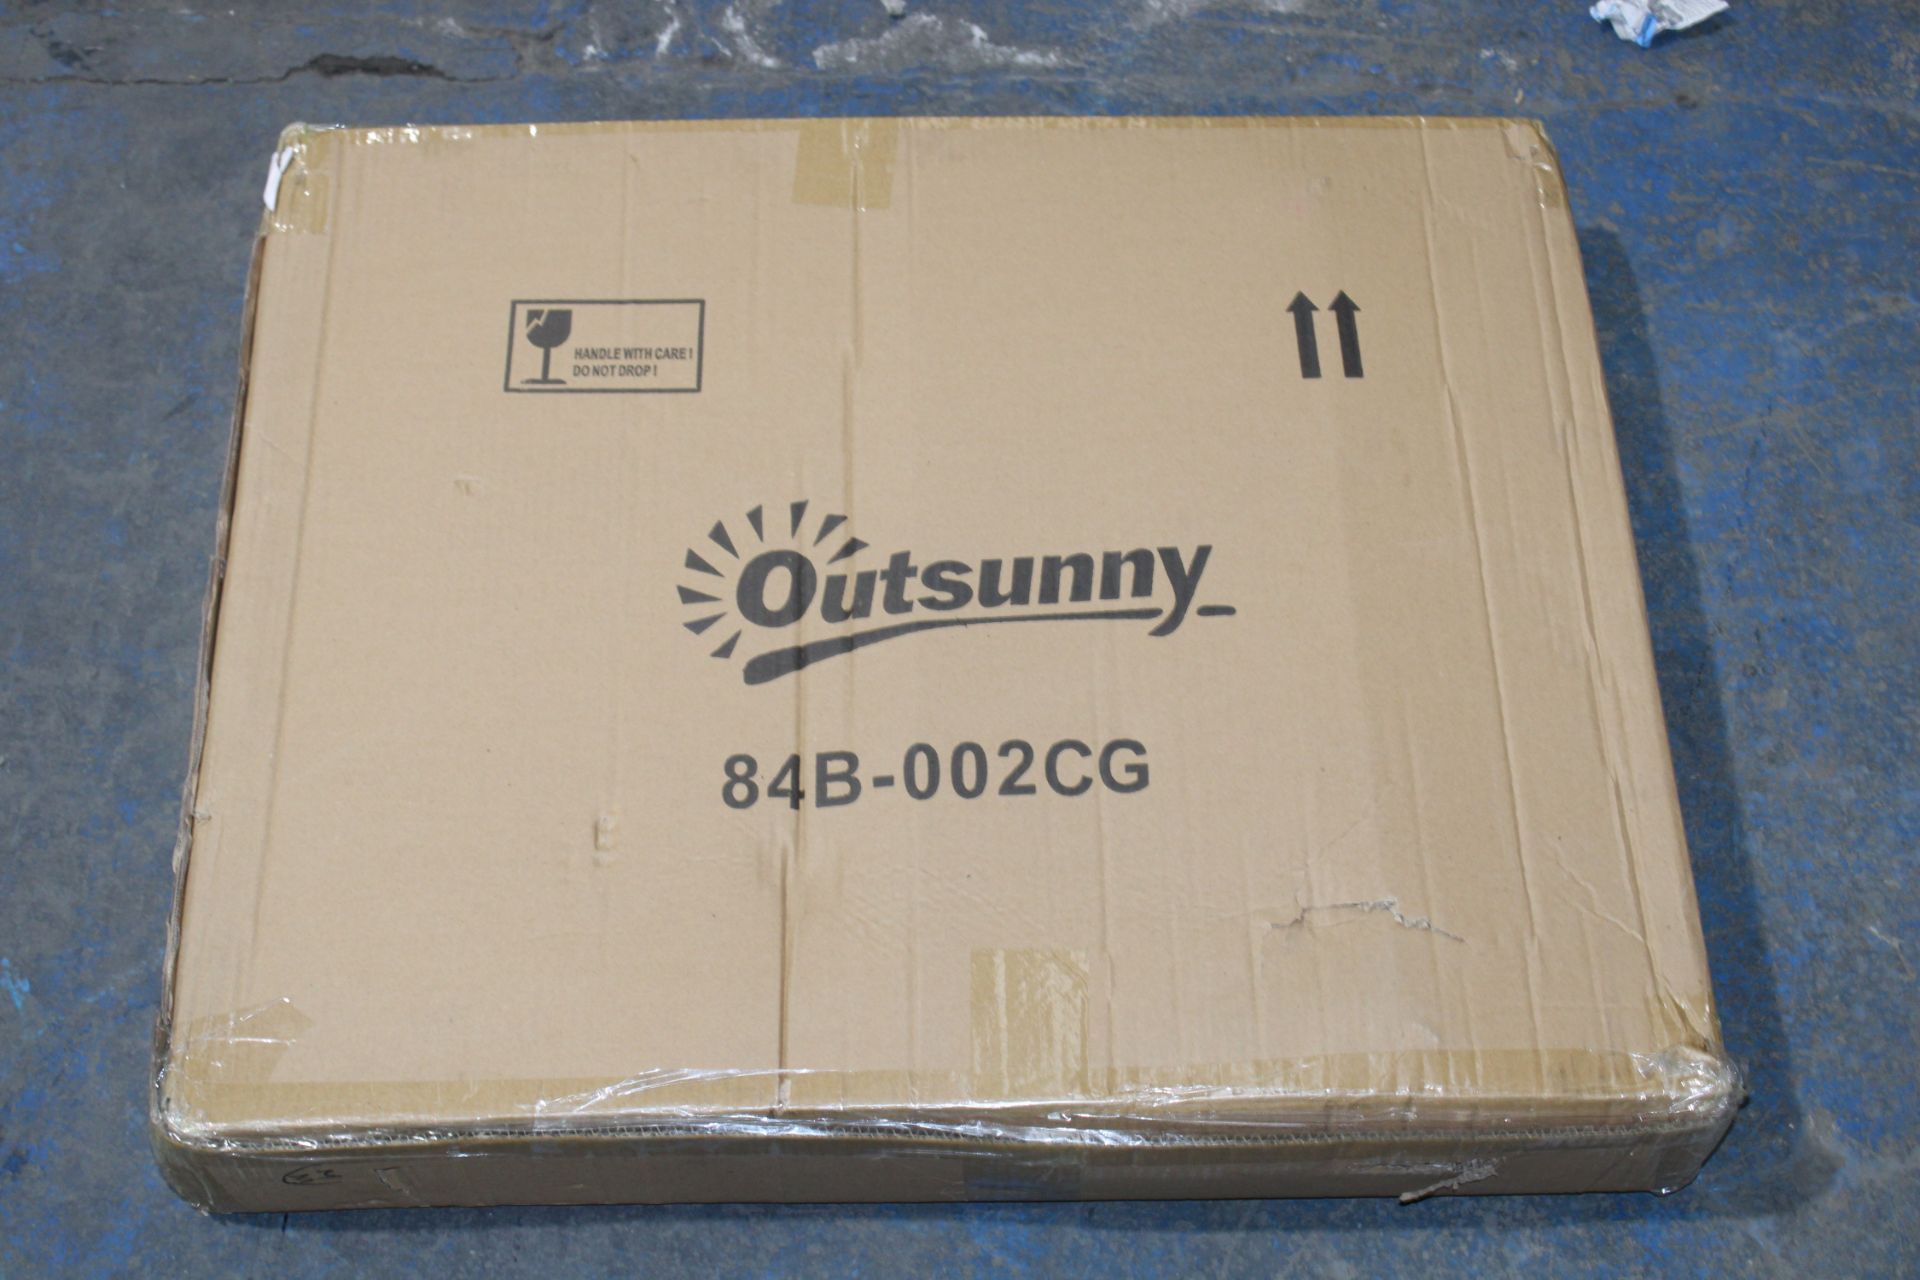 BOXED OUTSUNNY FABRIC FOLDING GARDEN CHAIR RRP £39.99 (AS SEEN IN WAYFAIR)Condition - Image 2 of 2